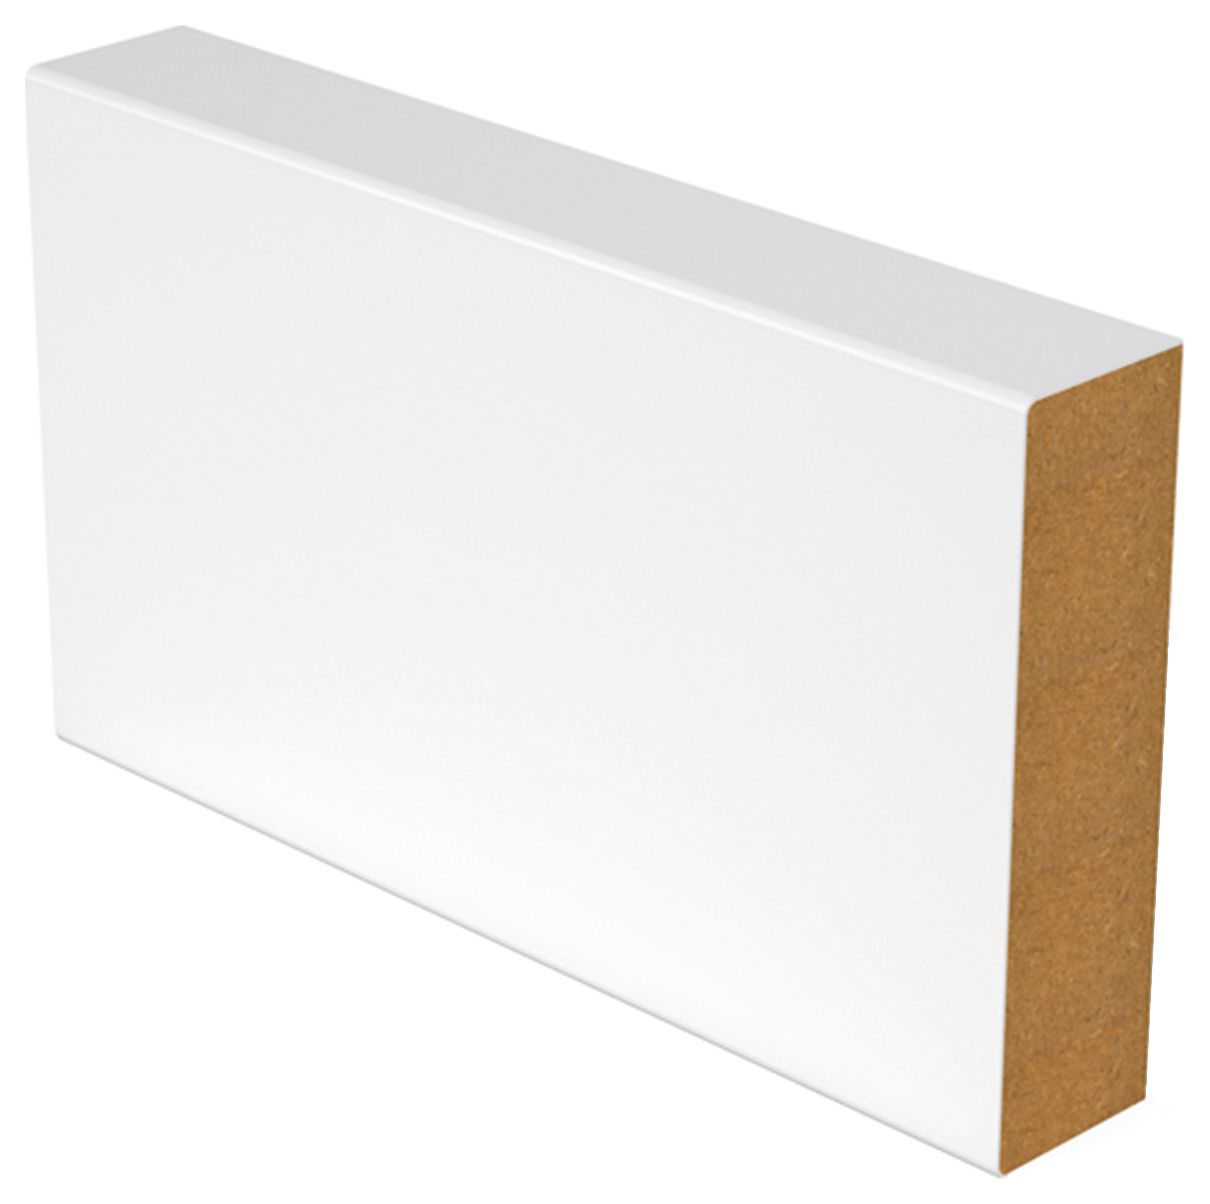 Image of Wickes Square Edge Skirting - 18 x 144 x 3660mm